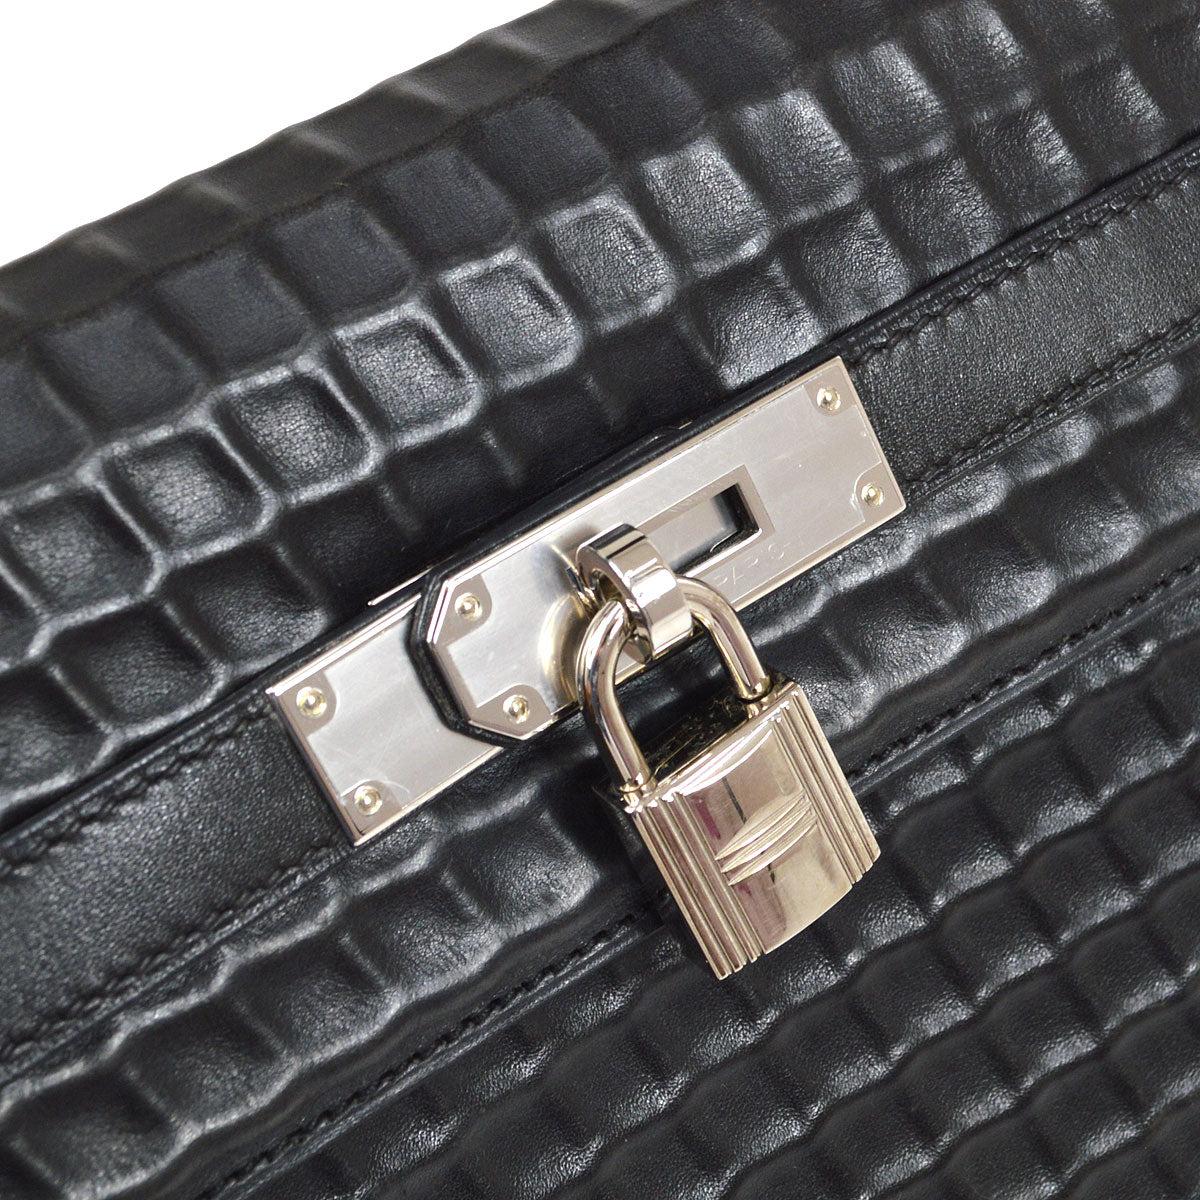 Pre-Owned Vintage Condition
From 2003 Collection
Everdeutch Leather 
Palladium Hardware
Measures 13